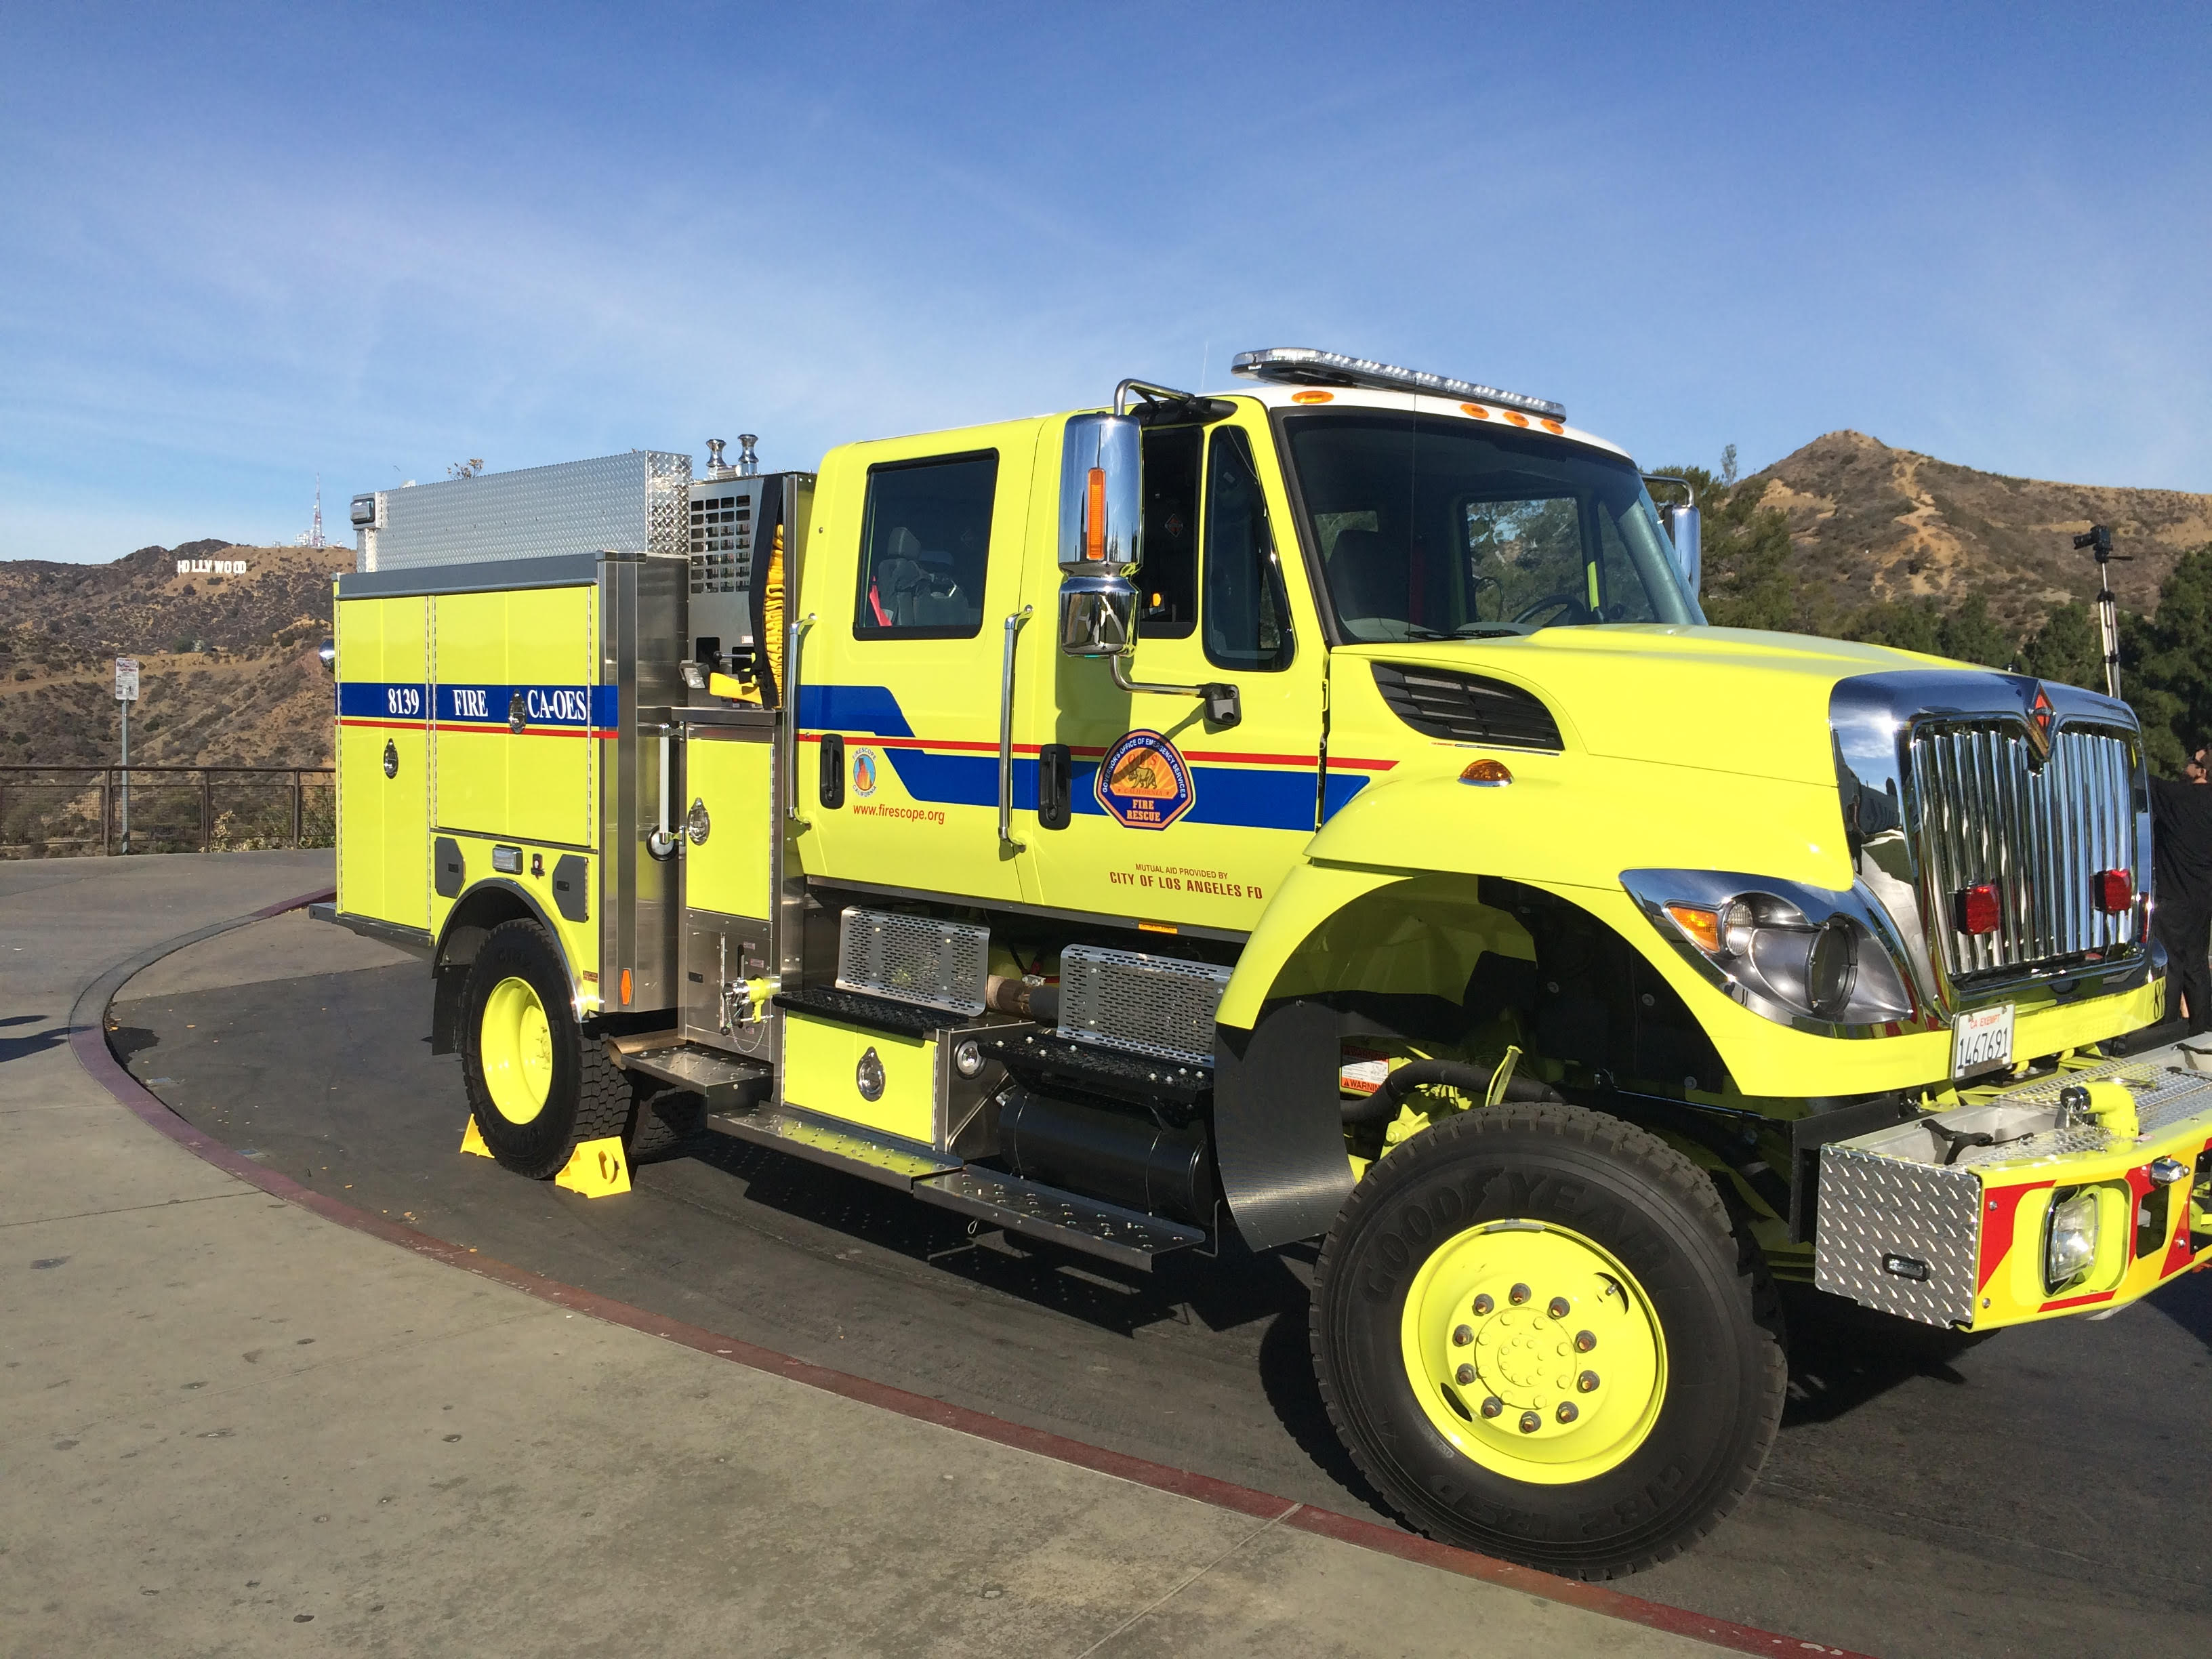 California OES Type III Wildland Fire Engine assigned to LAFD